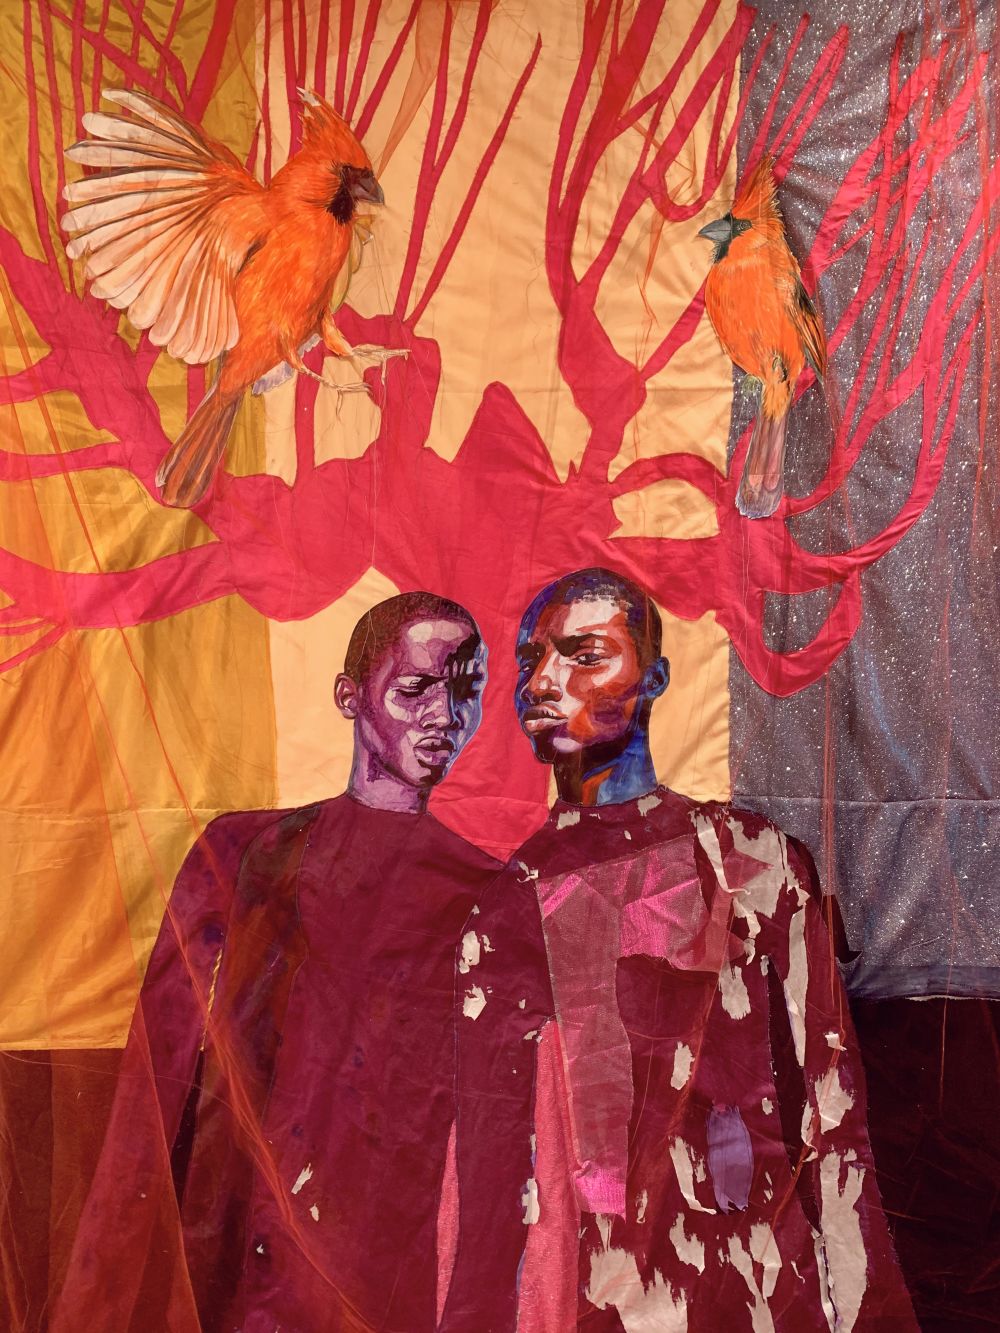 Artwork by Liana Ambrose-Murray of two figures in red on fabric